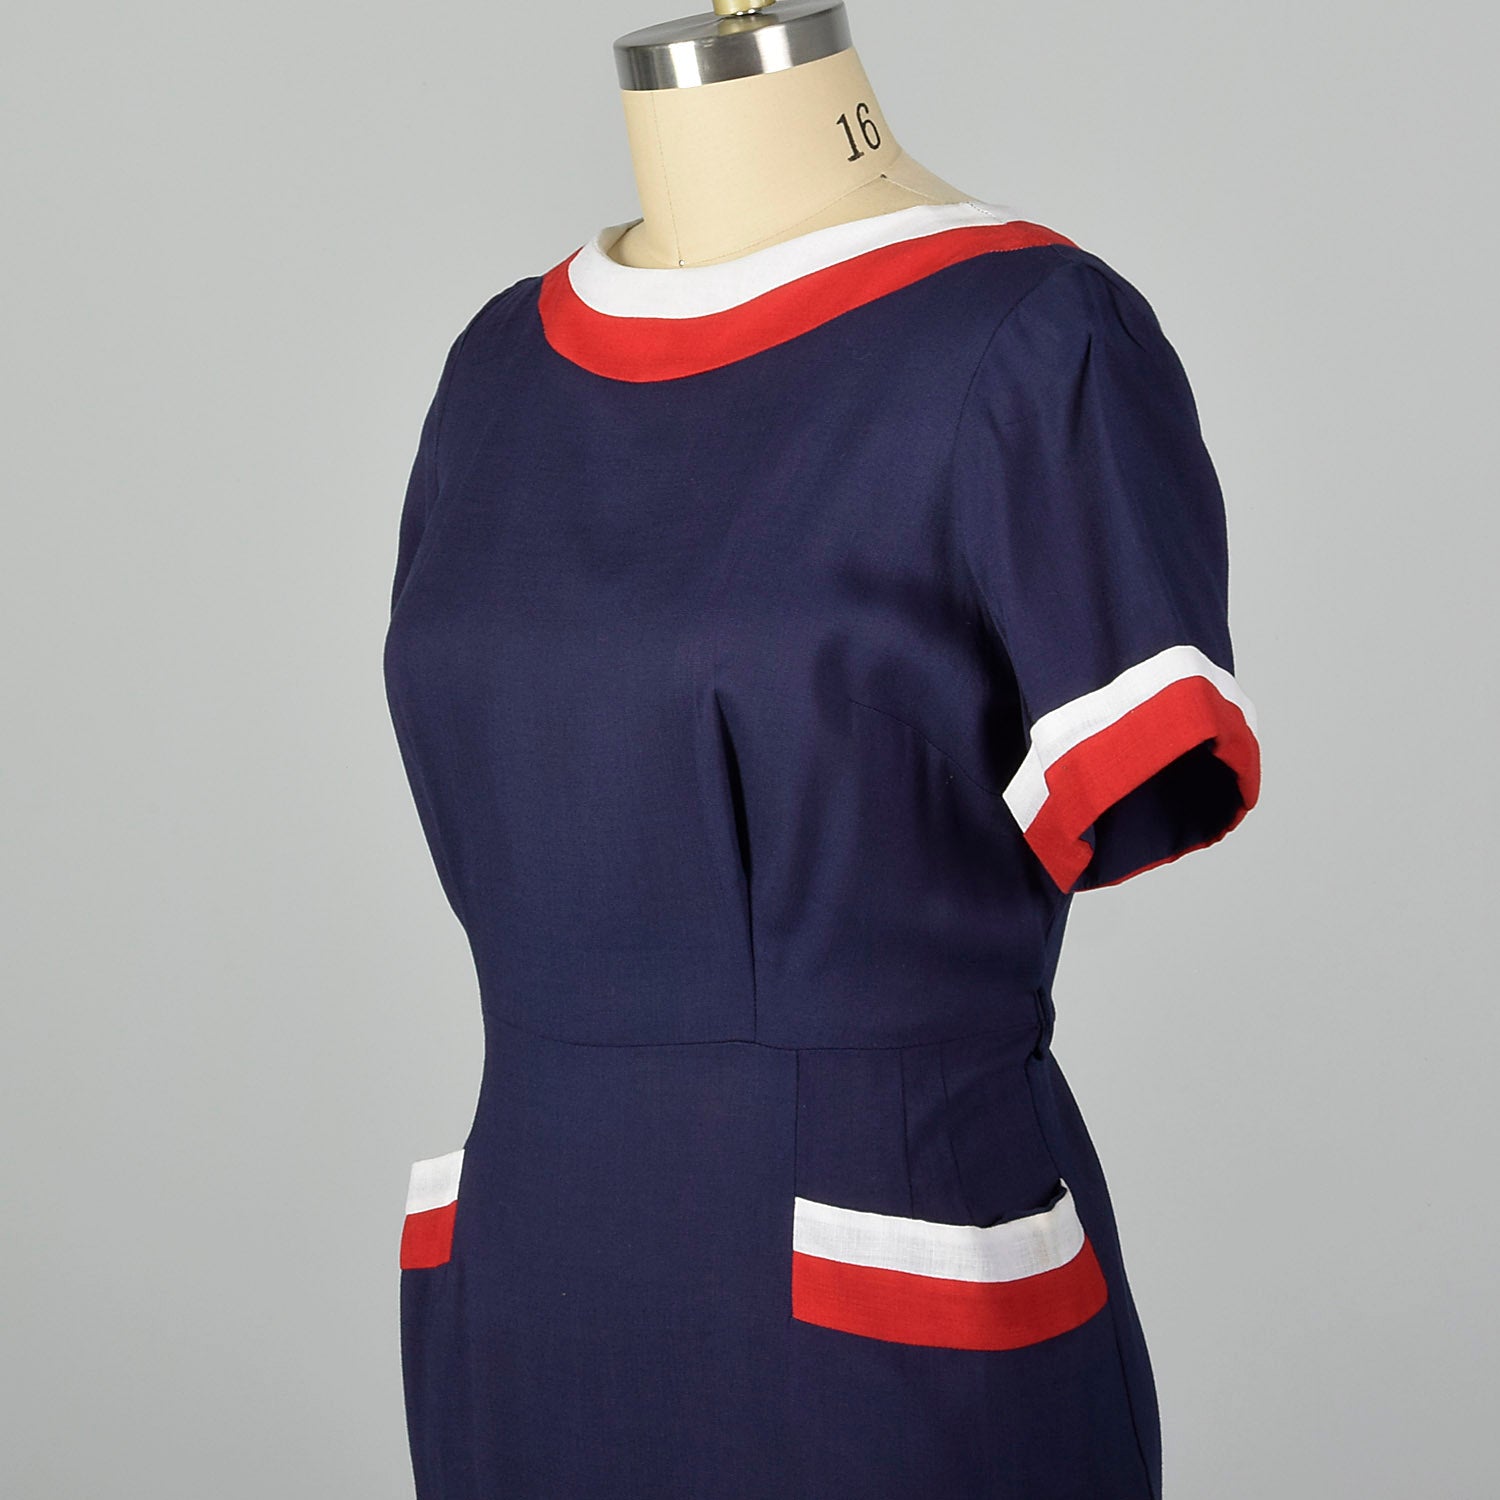 XXL 1950s Red White and Blue Day Dress